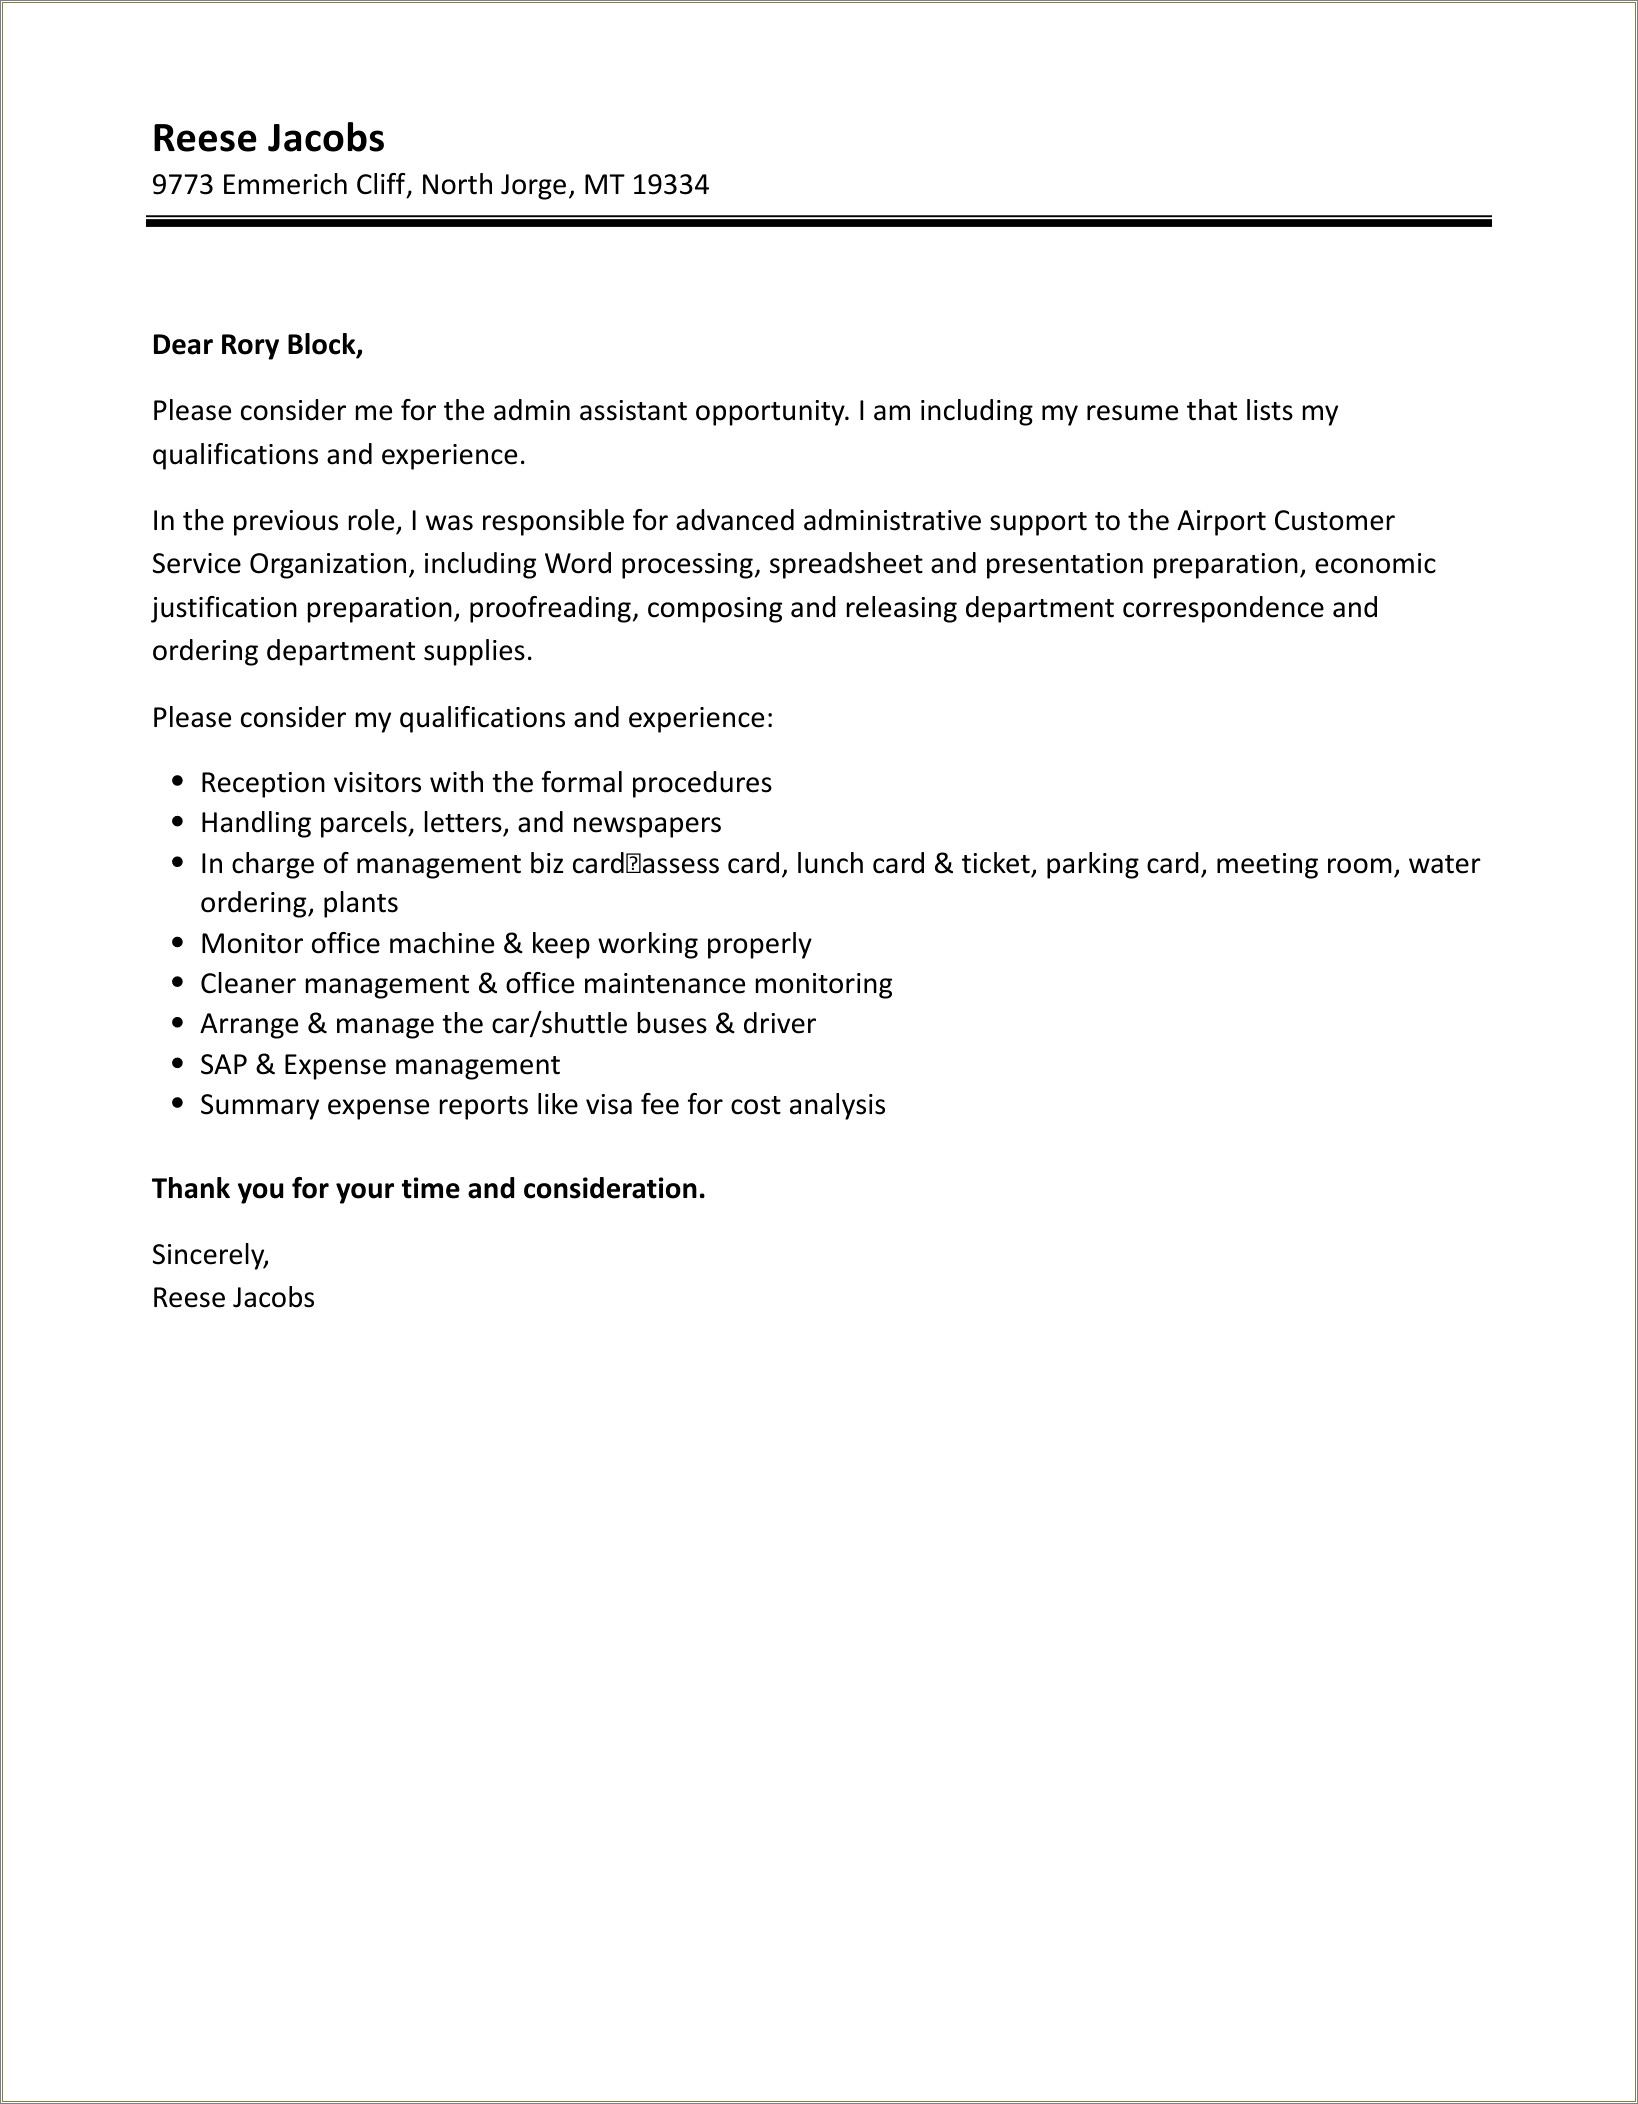 Example Resume Cover Letter For Administrative Assistant